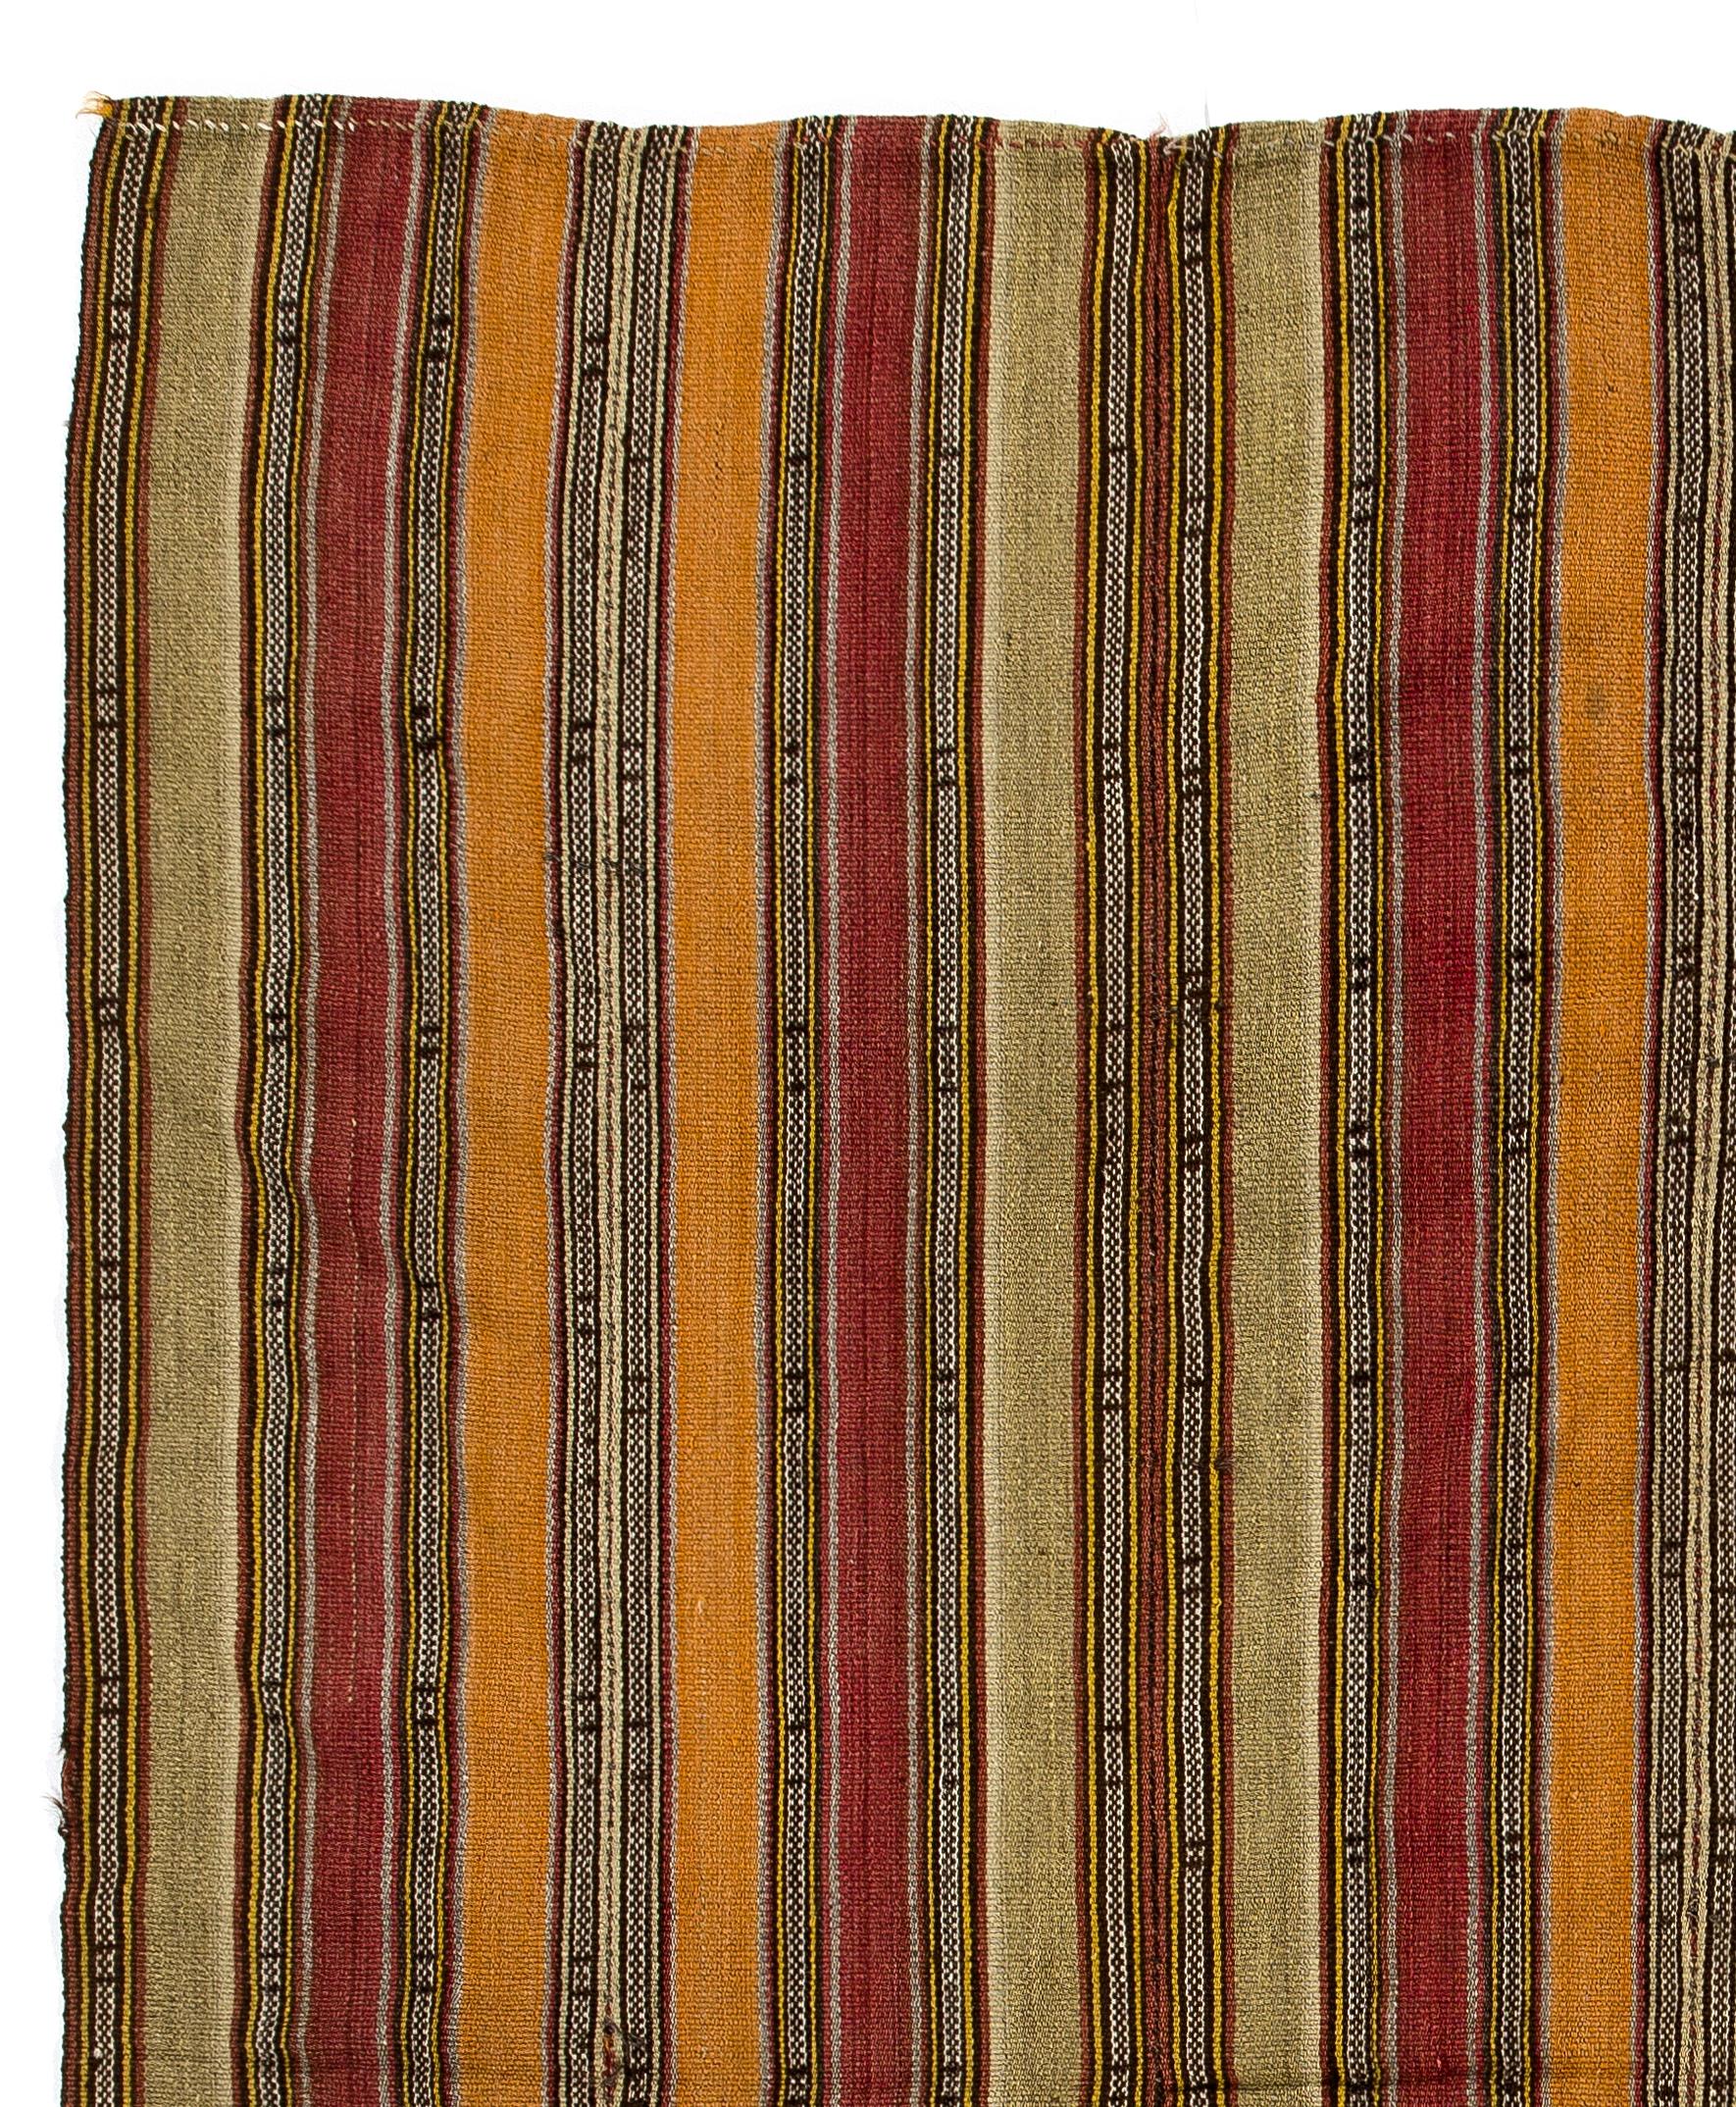 This authentic handwoven flat-weave (Kilim) from Central Turkey was made by Nomads to be used as a floor covering in their tents or summer houses circa mid-20th century. These vintage utilitarian Kilims were made to use for everyday life rather than